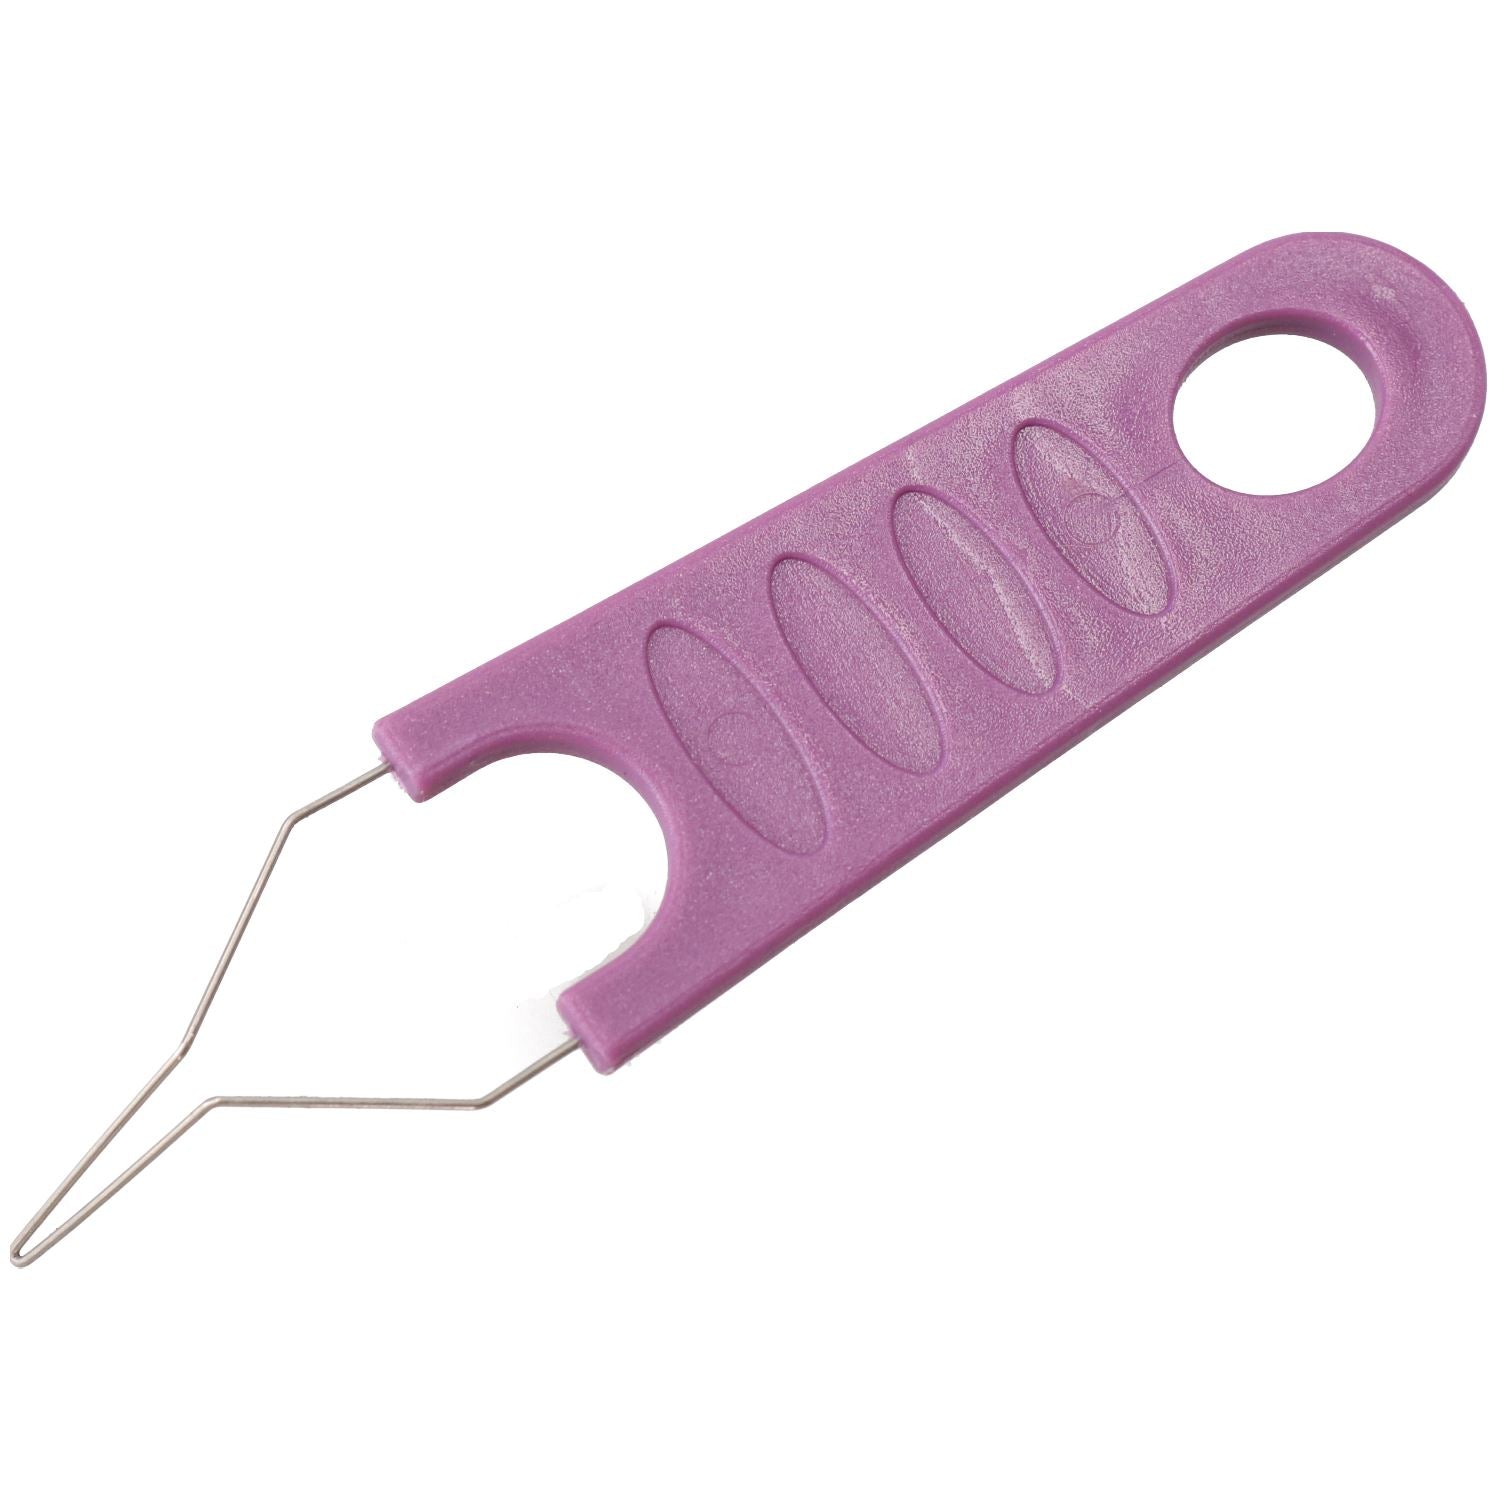 Veterinary Approved Tick Remover Tool For All Tick Sizes For Dogs Cats Pets